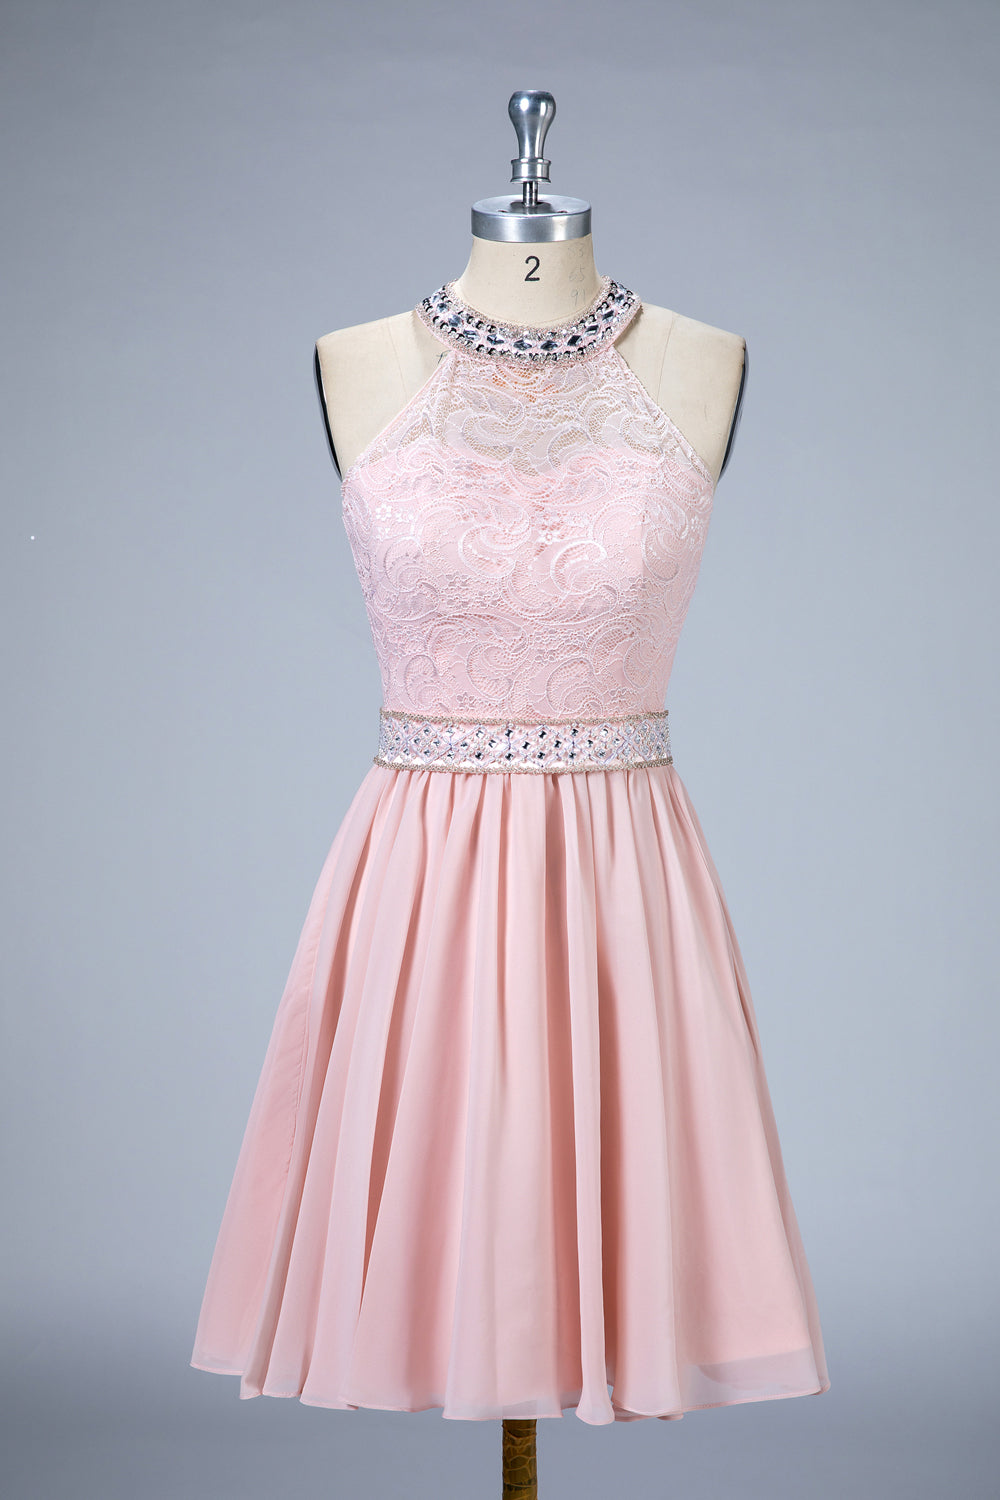 Halter A-Line Lace and Chiffon Homecoming Dresses